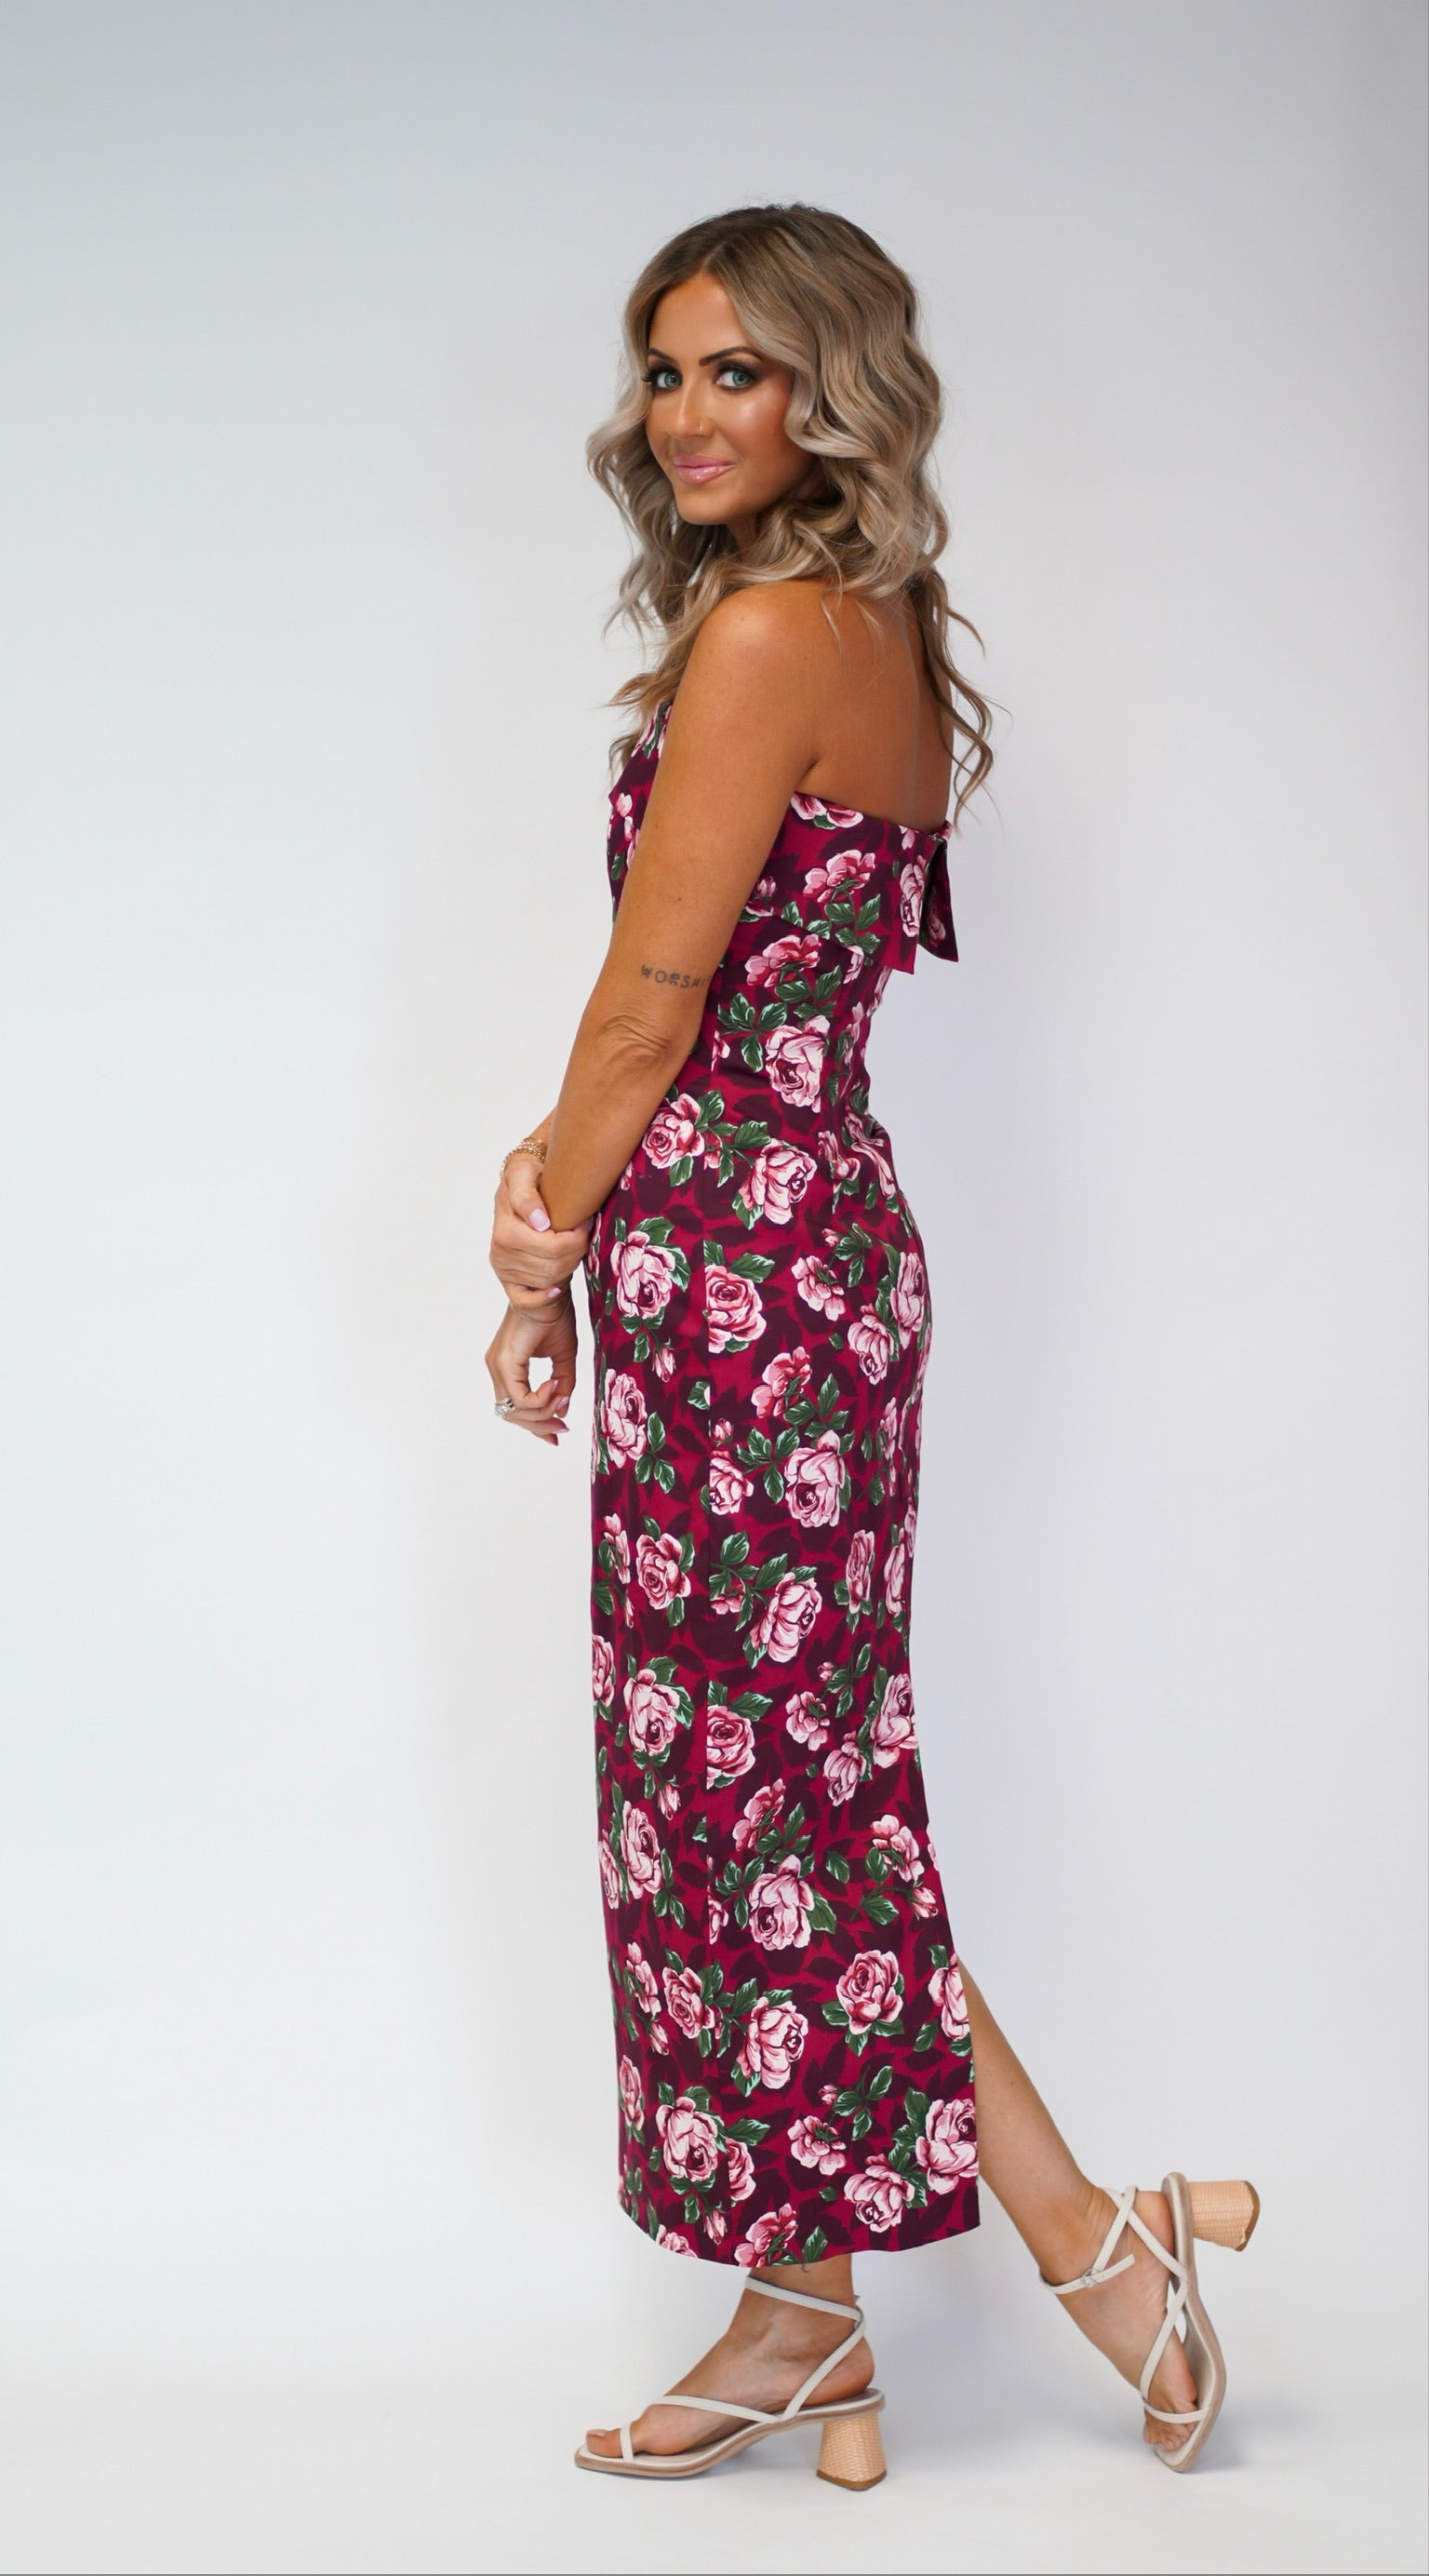 girl wearing tube dress with floral detail maxi style while the girl is standing sideways toward camera